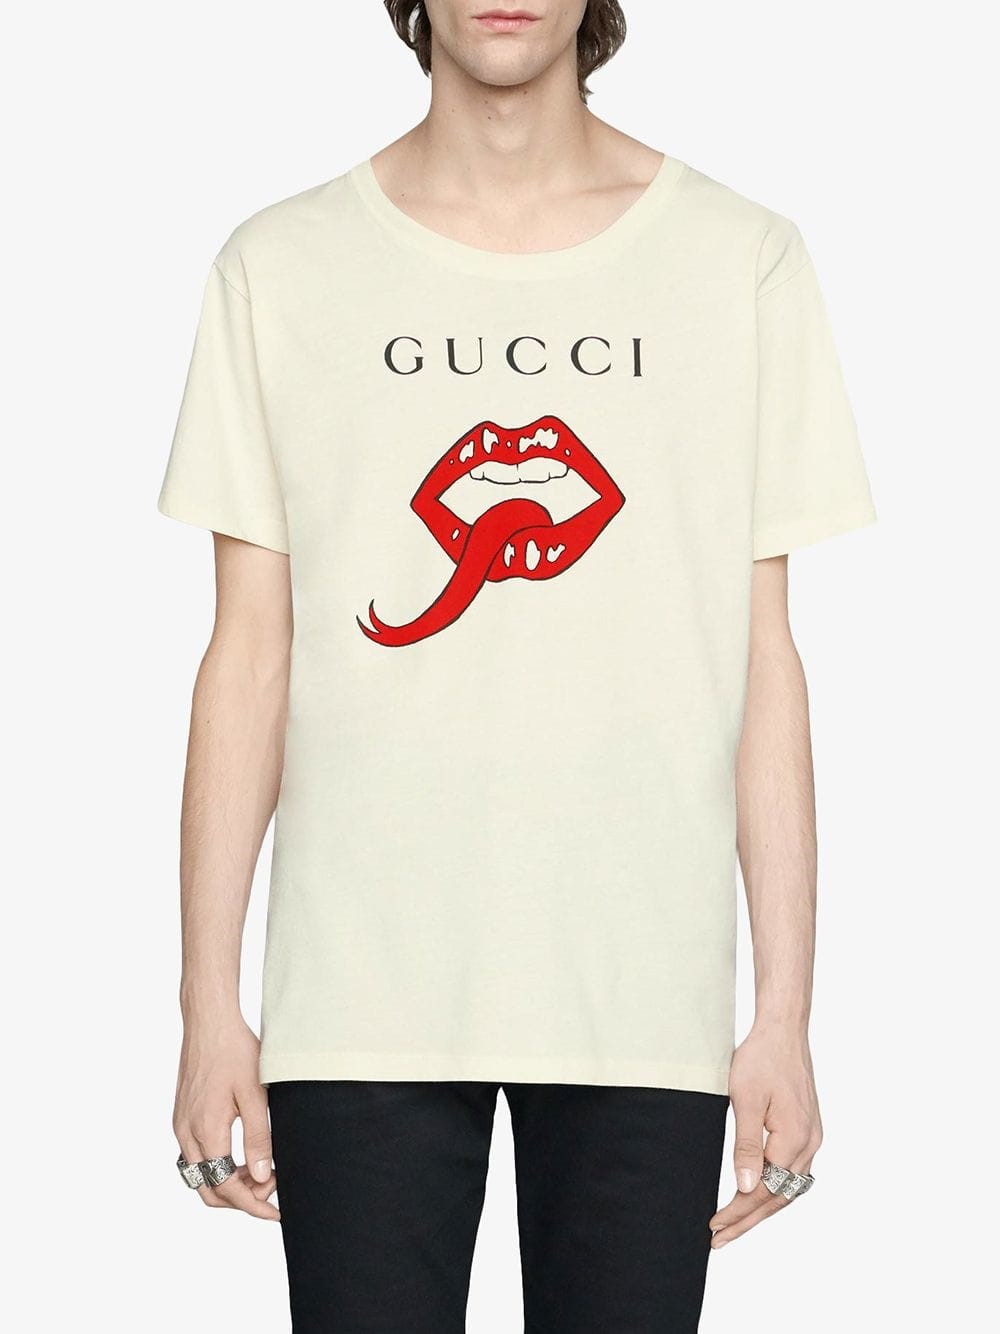 after school Shortcuts tolerance gucci MOUTH PRINT T-SHIRT available on montiboutique.com - 26178